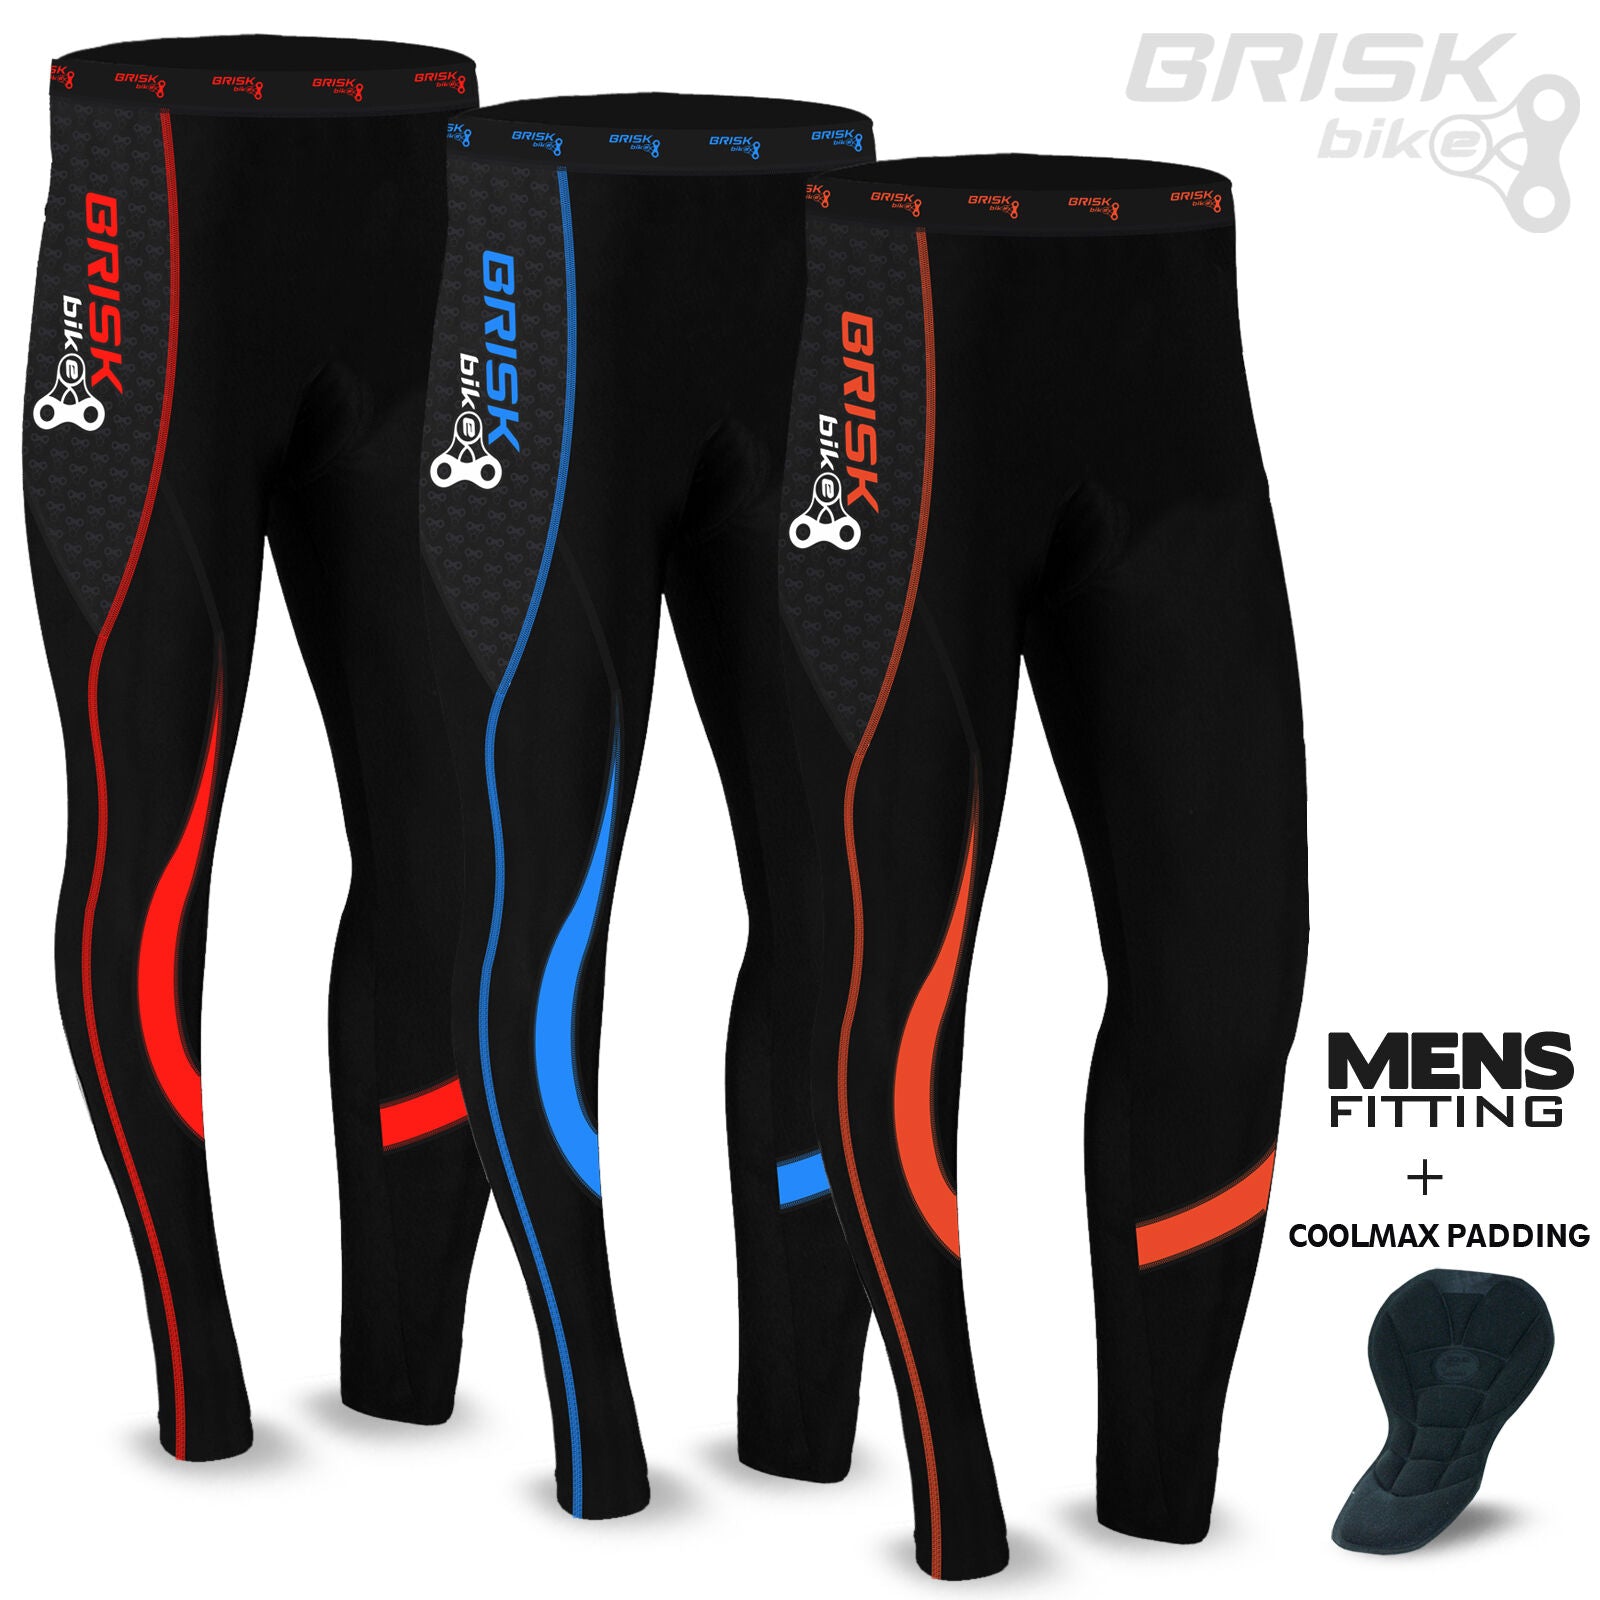 Mens Cycling Tights Thermal Legging Bicyle Pant Trouser Coolmax Padded